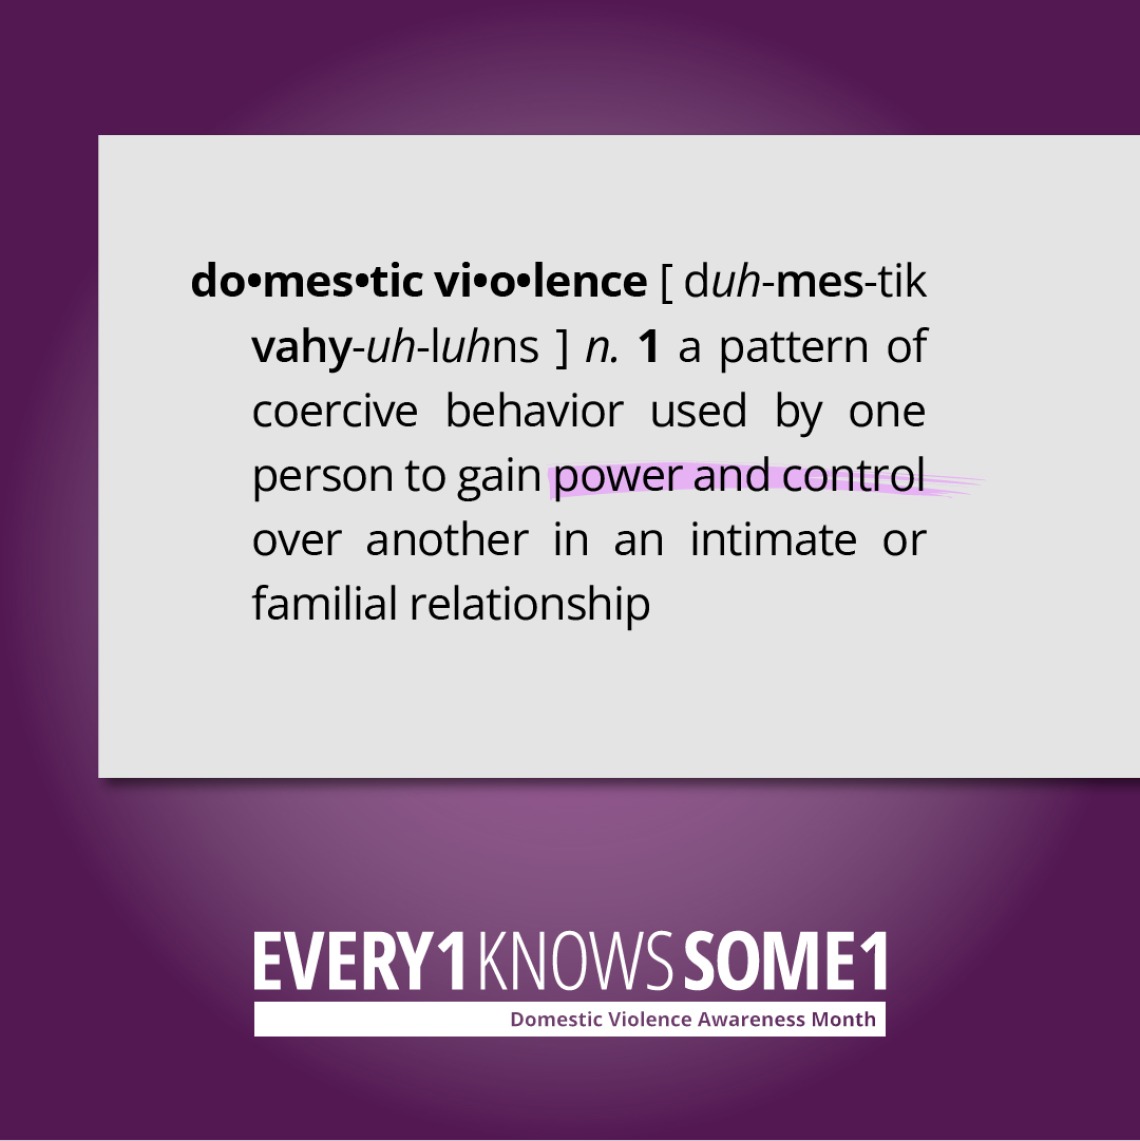 Against a purple background, black text in a light gray box reads: "do-mes-tic vi-o-lence [duh-mes-tik vahy-uh-luhns] n. 1 a pattern of coercive behavior used by one person to gain power and control over another in an intimate or familial relationship" with "power and control" highlighted in light purple. White Every1KnowsSome1 logo centered below the box.